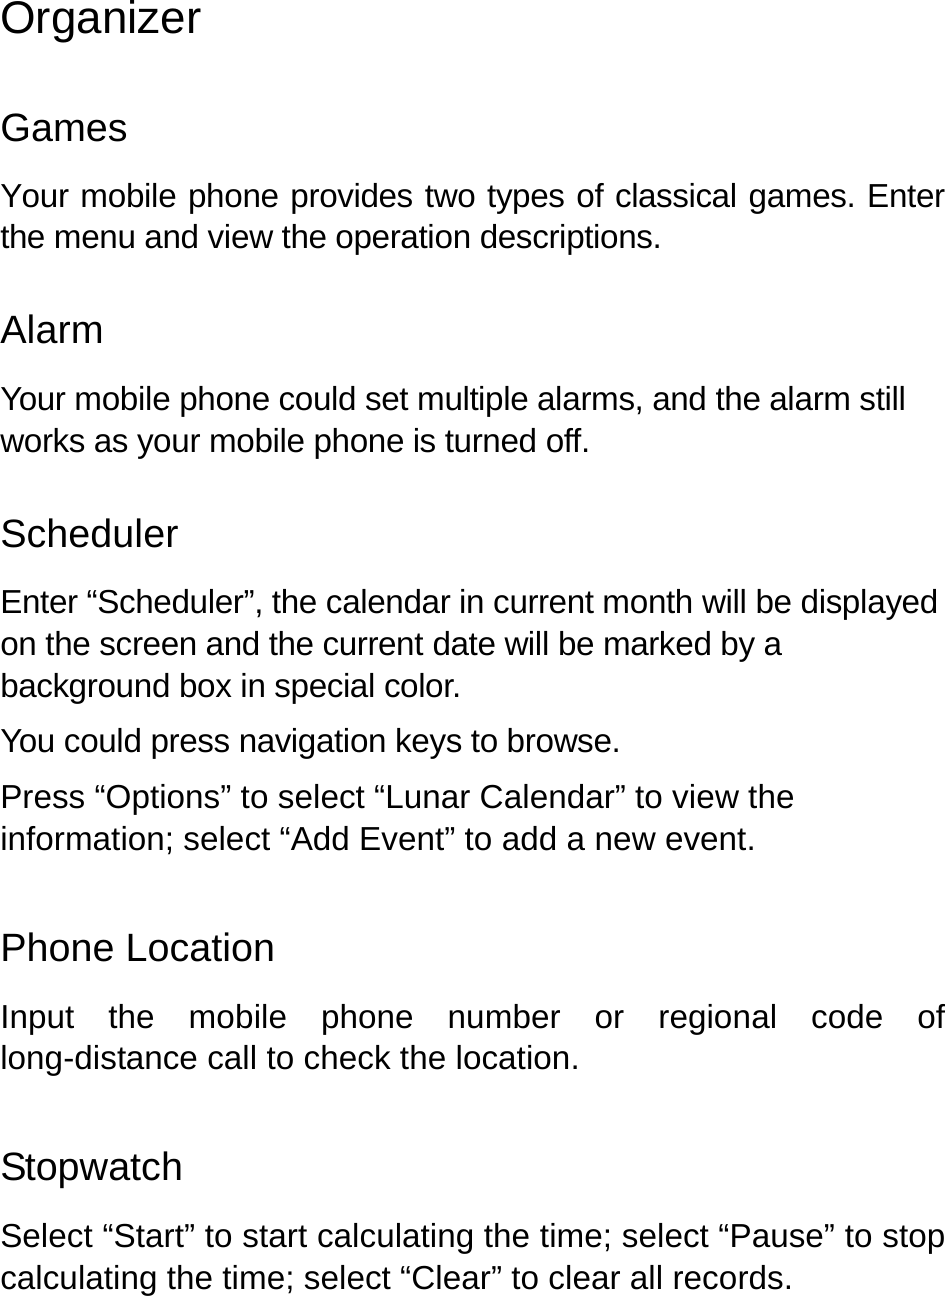   Organizer Games Your mobile phone provides two types of classical games. Enter the menu and view the operation descriptions.   Alarm Your mobile phone could set multiple alarms, and the alarm still works as your mobile phone is turned off.     Scheduler Enter “Scheduler”, the calendar in current month will be displayed on the screen and the current date will be marked by a background box in special color.   You could press navigation keys to browse. Press “Options” to select “Lunar Calendar” to view the information; select “Add Event” to add a new event. Phone Location   Input the mobile phone number or regional code of long-distance call to check the location. Stopwatch Select “Start” to start calculating the time; select “Pause” to stop calculating the time; select “Clear” to clear all records.   